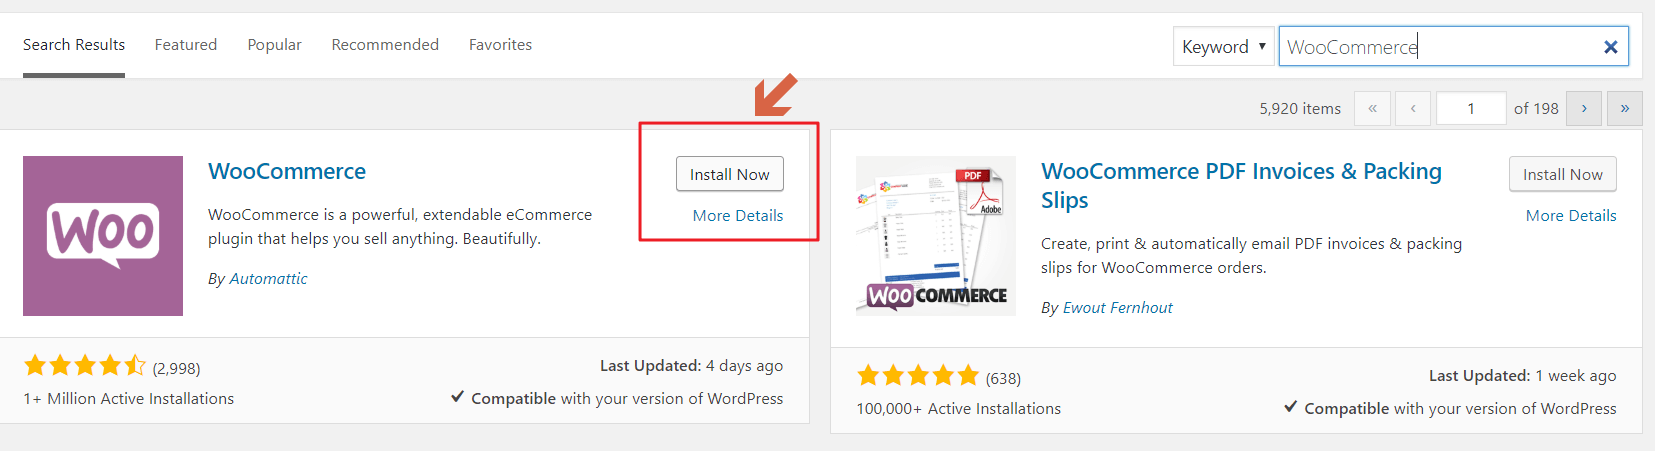 How to Install a WordPress Plugin Step by Step - 3